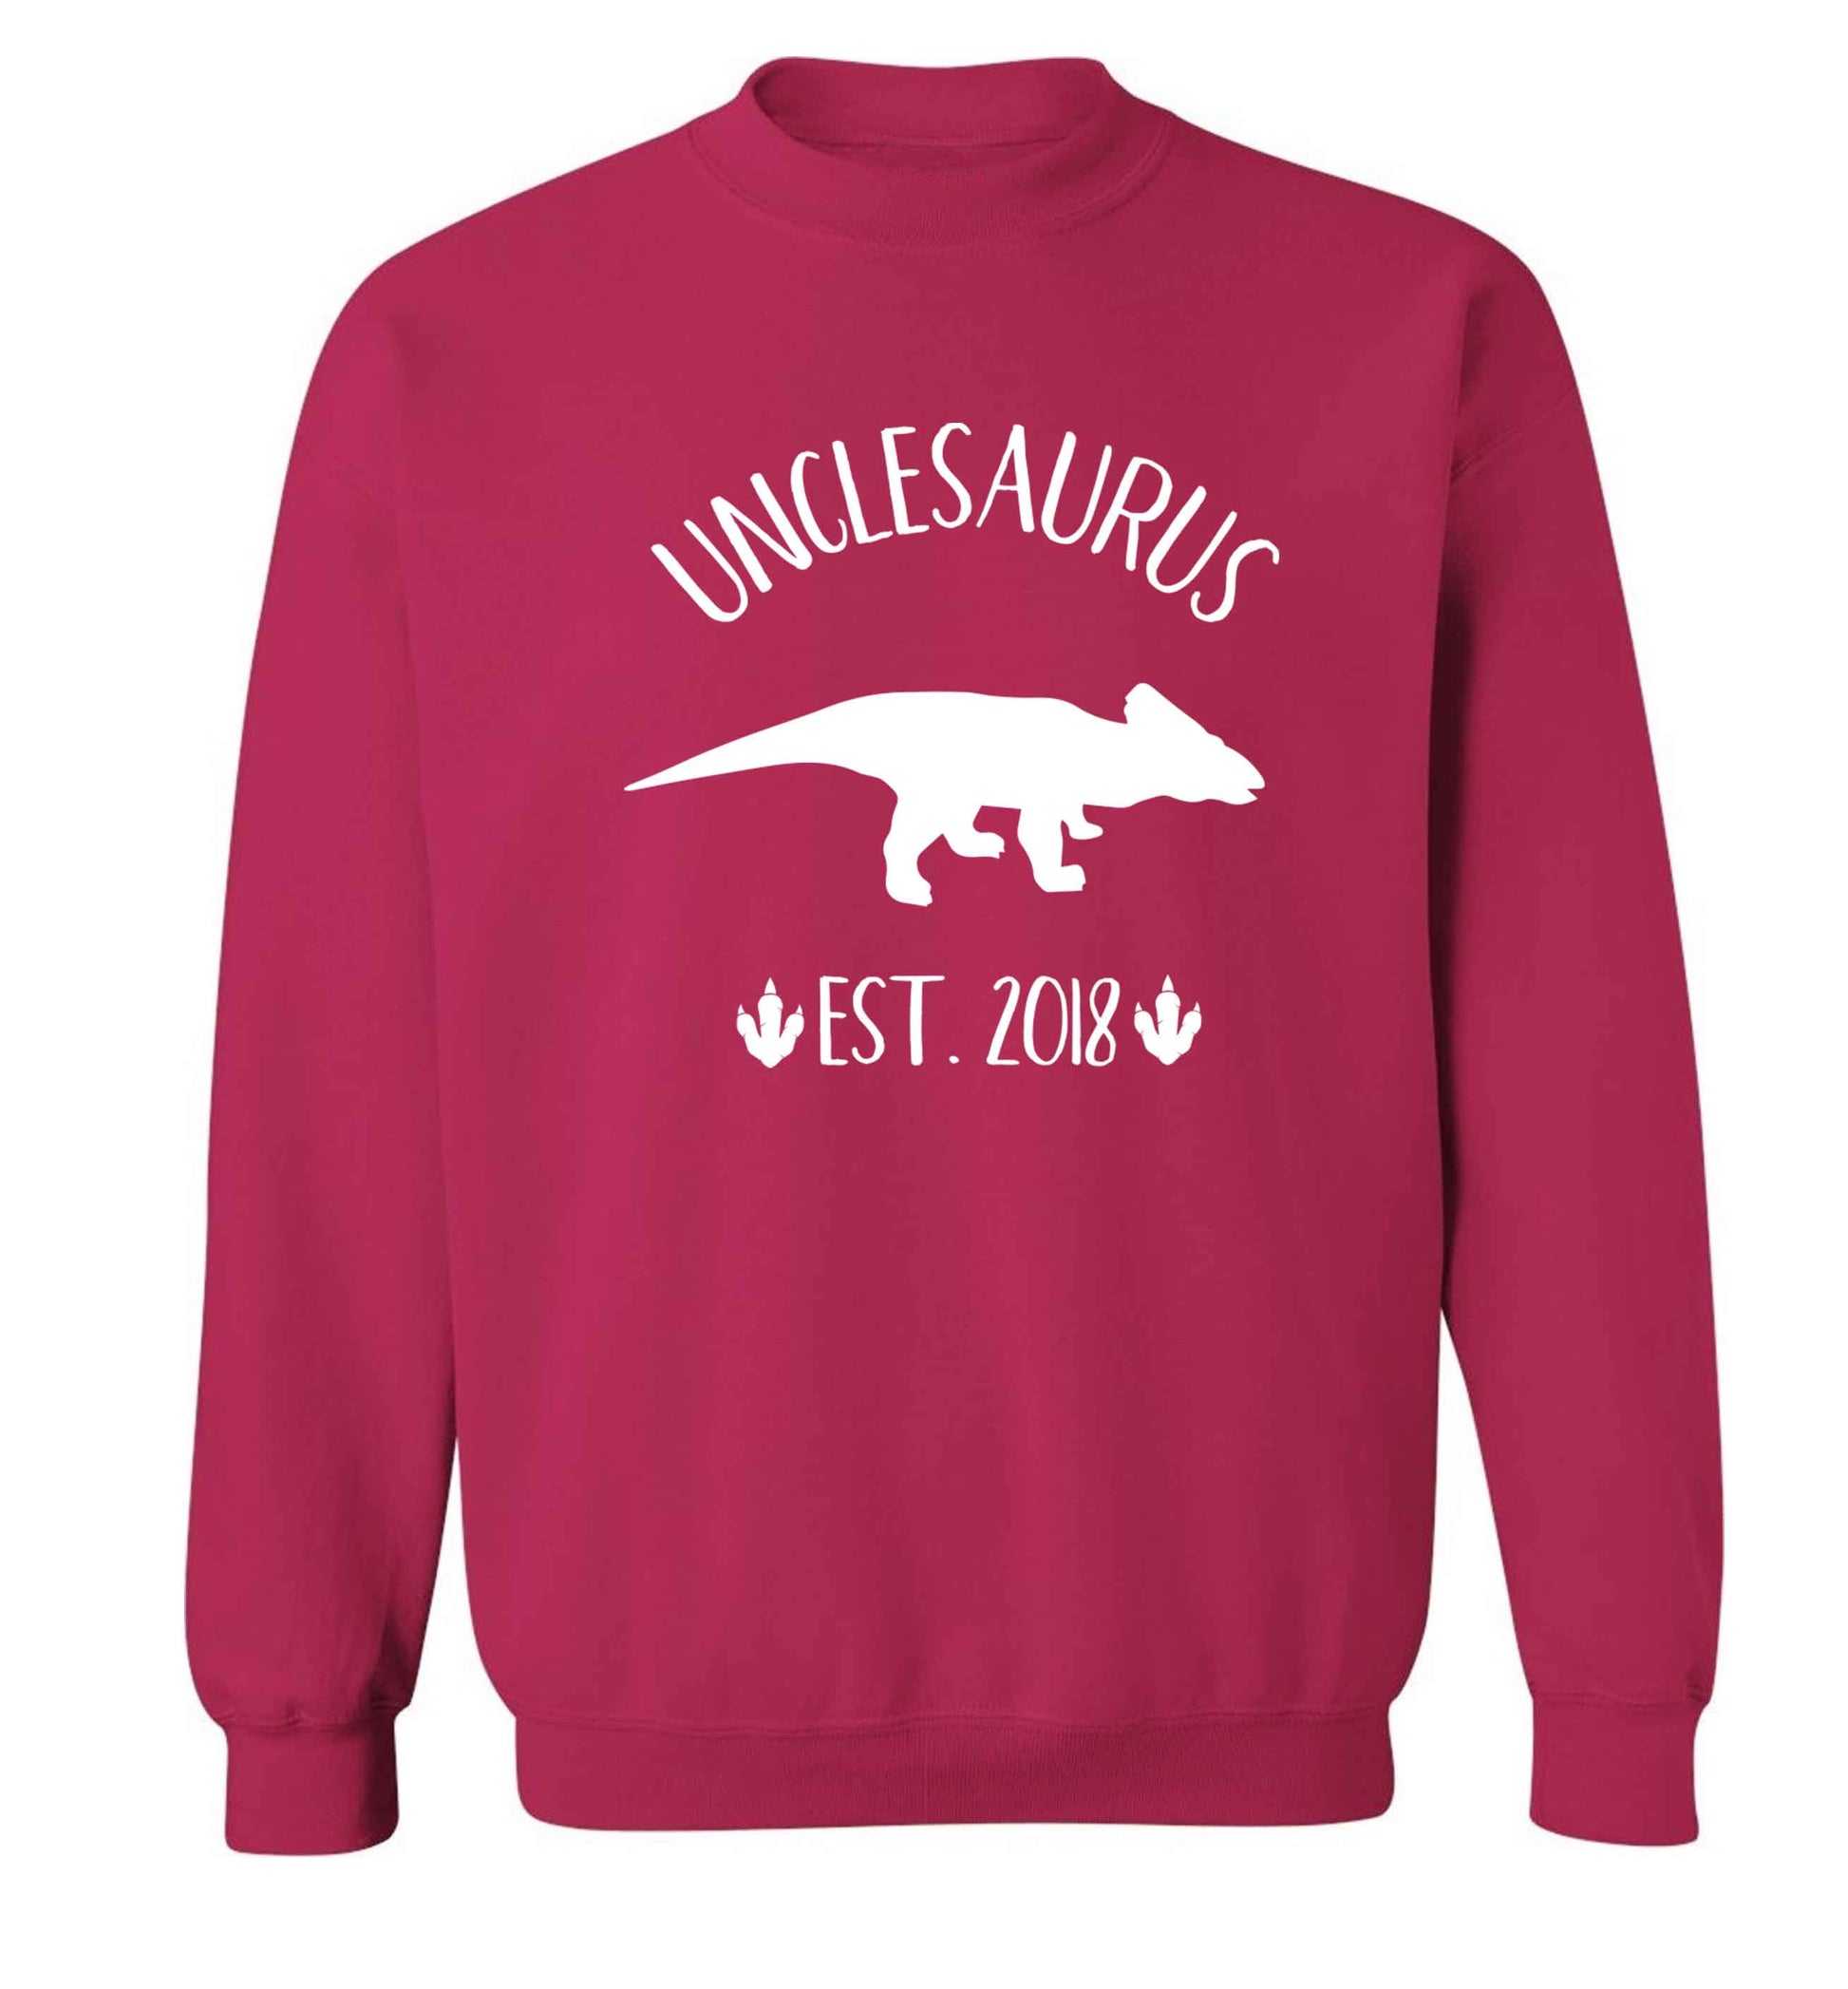 Personalised unclesaurus since (custom date) Adult's unisex pink Sweater 2XL